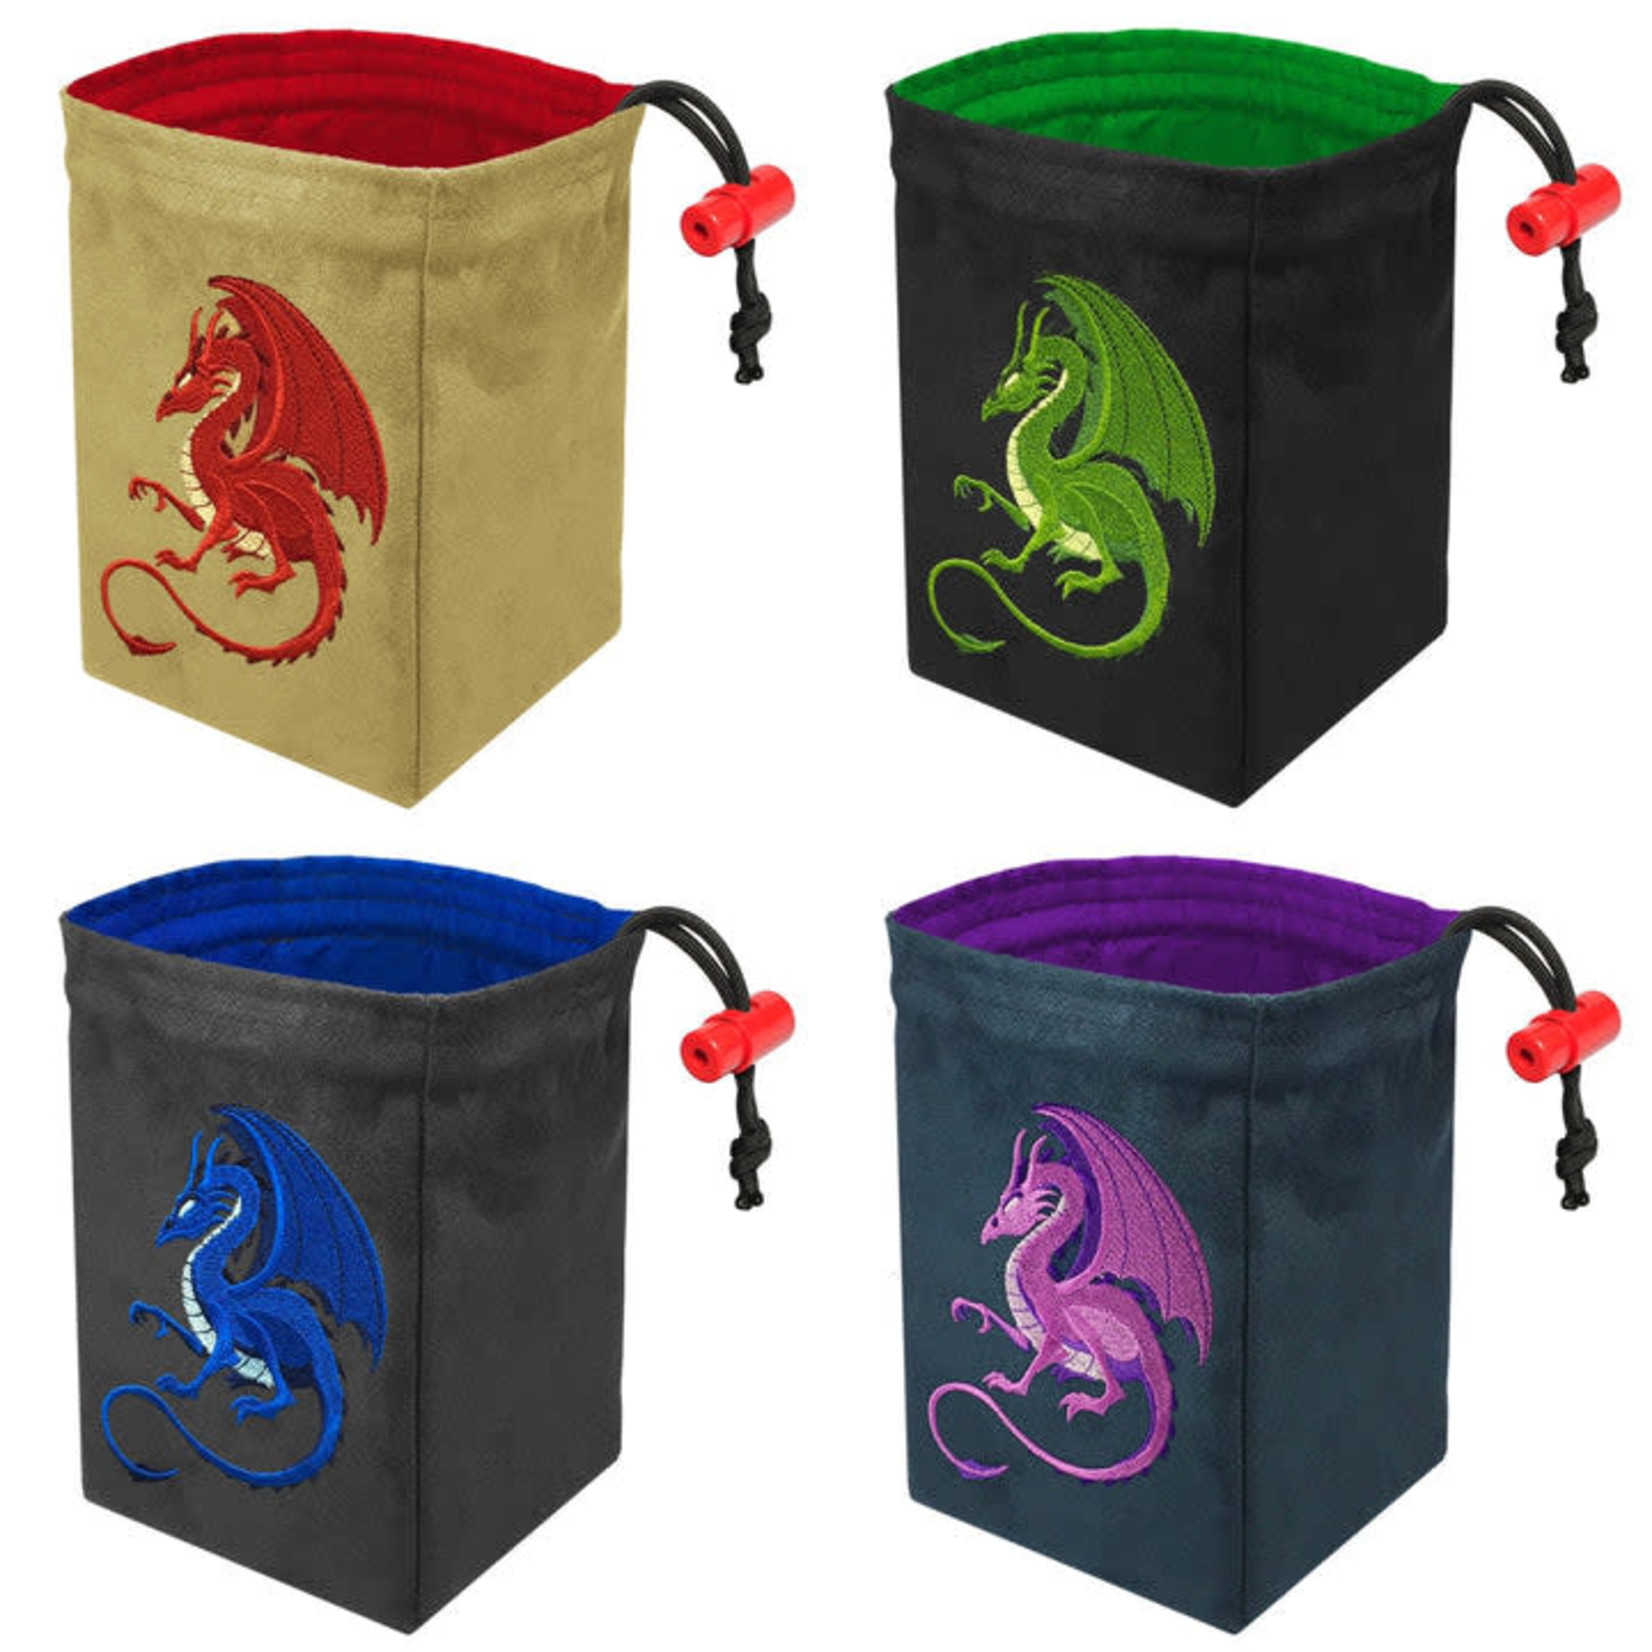 Red King Co. Embroidered Dice Bag - Fantasy Dragon Red